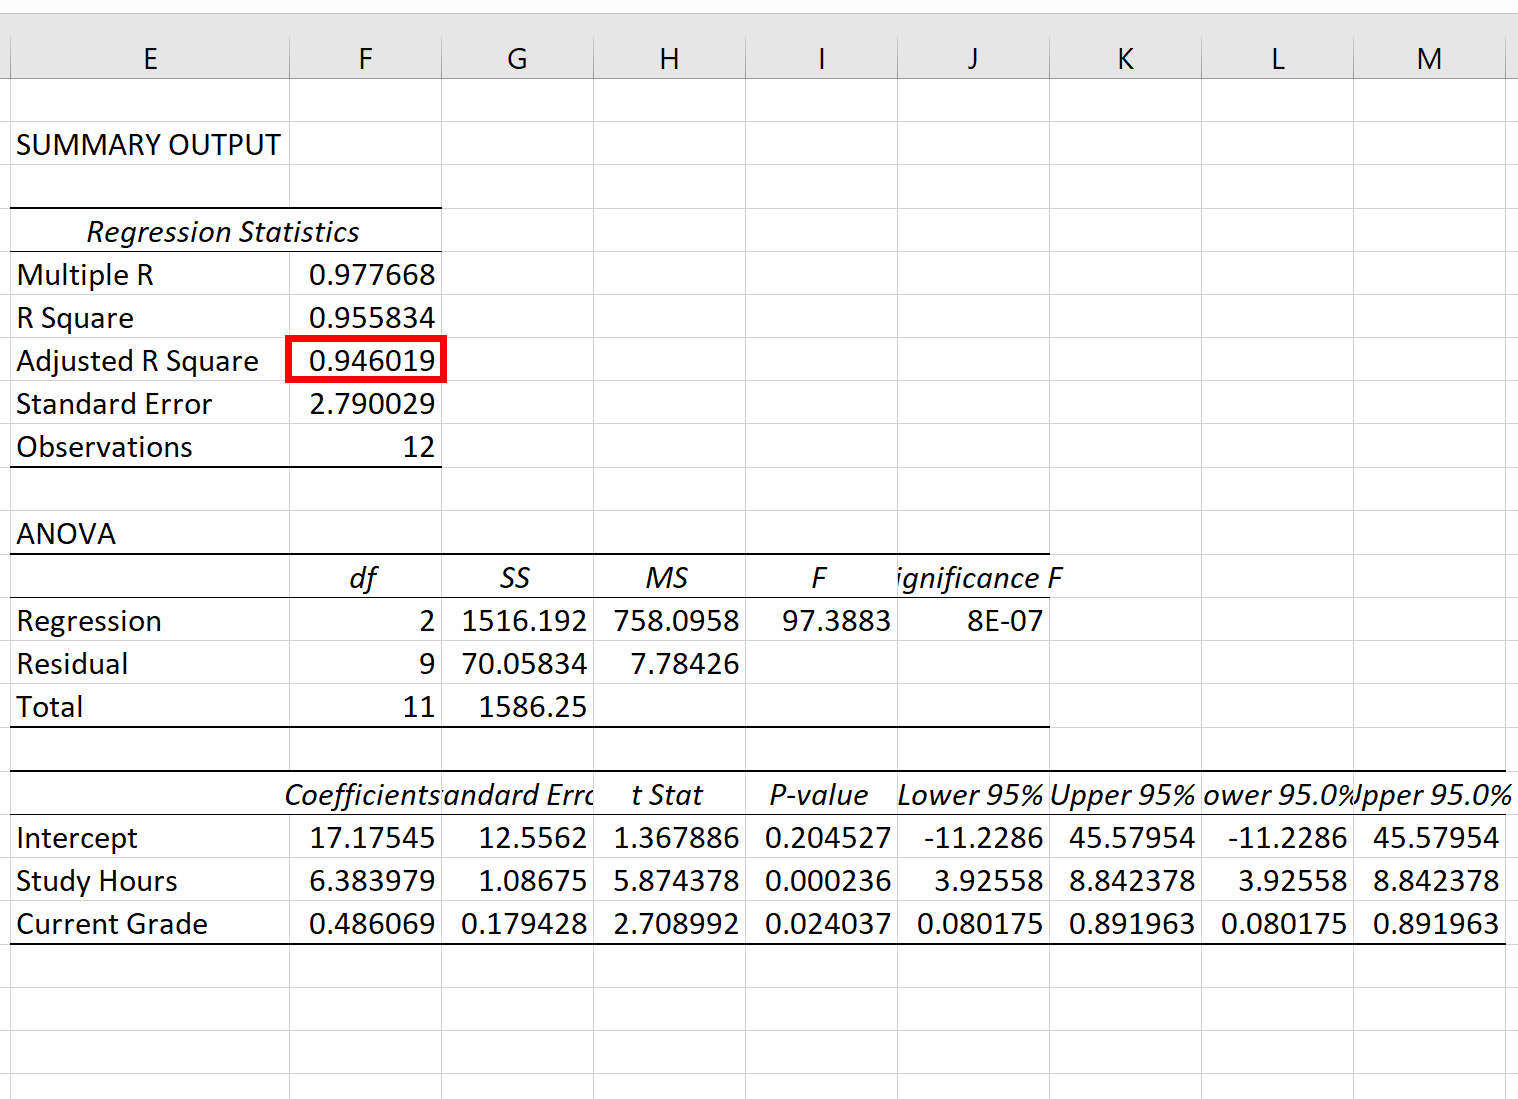 Adjusted R-squared in Excel